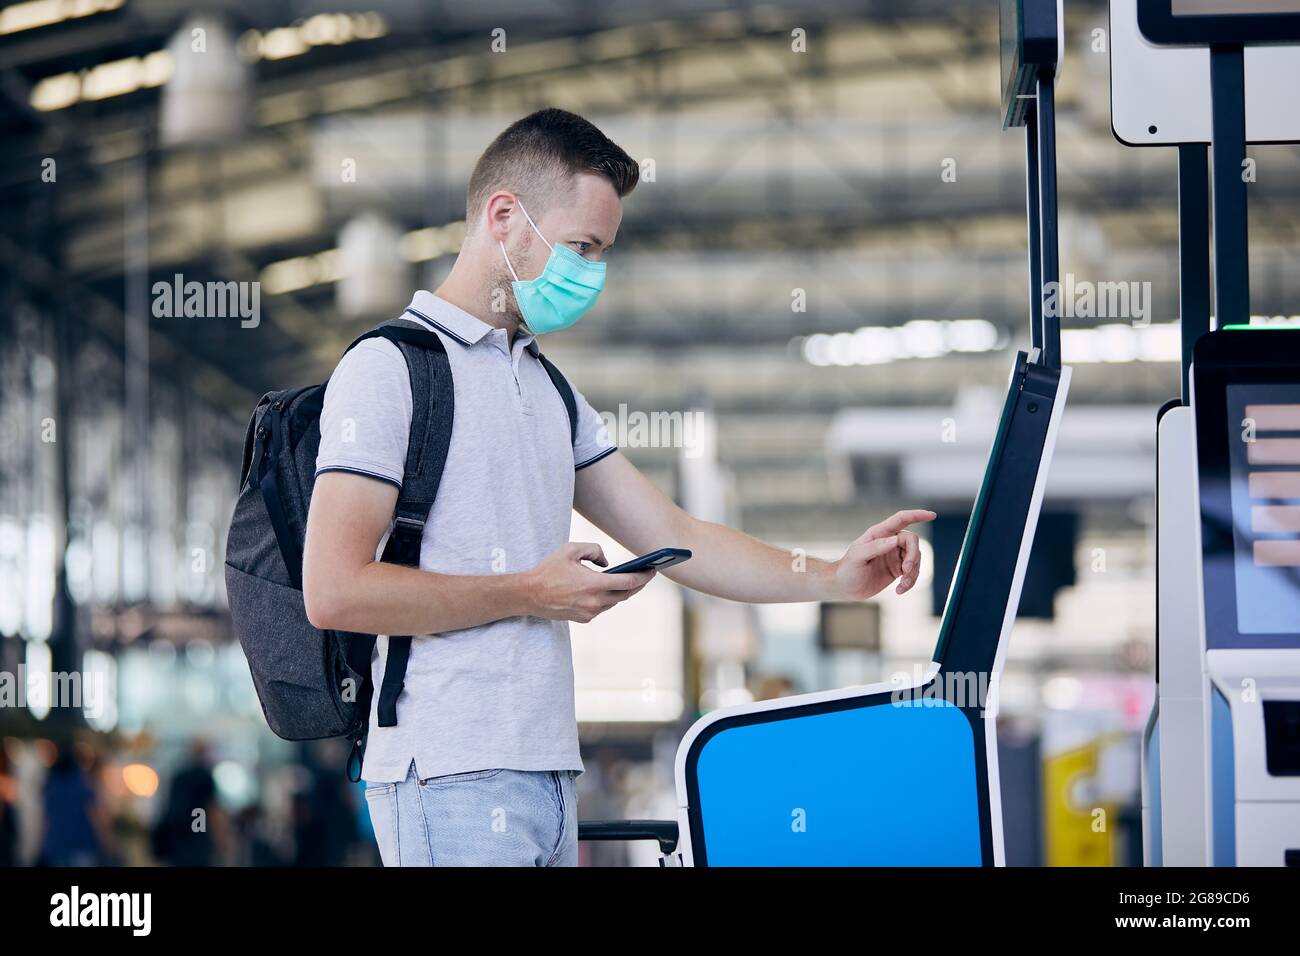 Man using self service check-in machine. Passenger scanning ticket on smart phone at airport terminal. Stock Photo